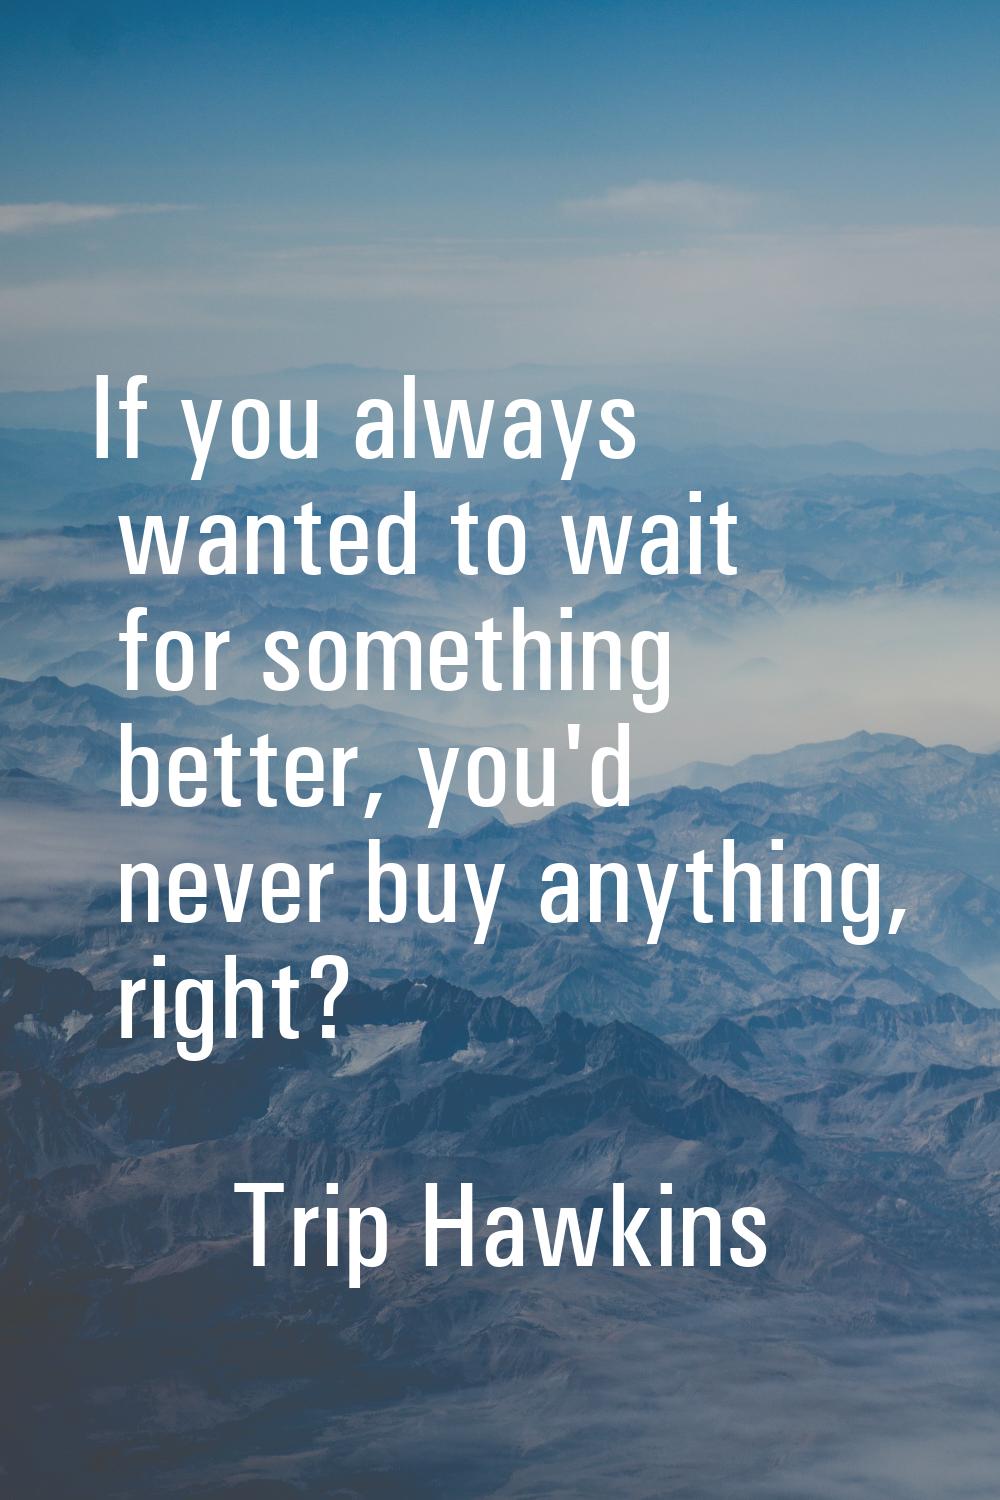 If you always wanted to wait for something better, you'd never buy anything, right?